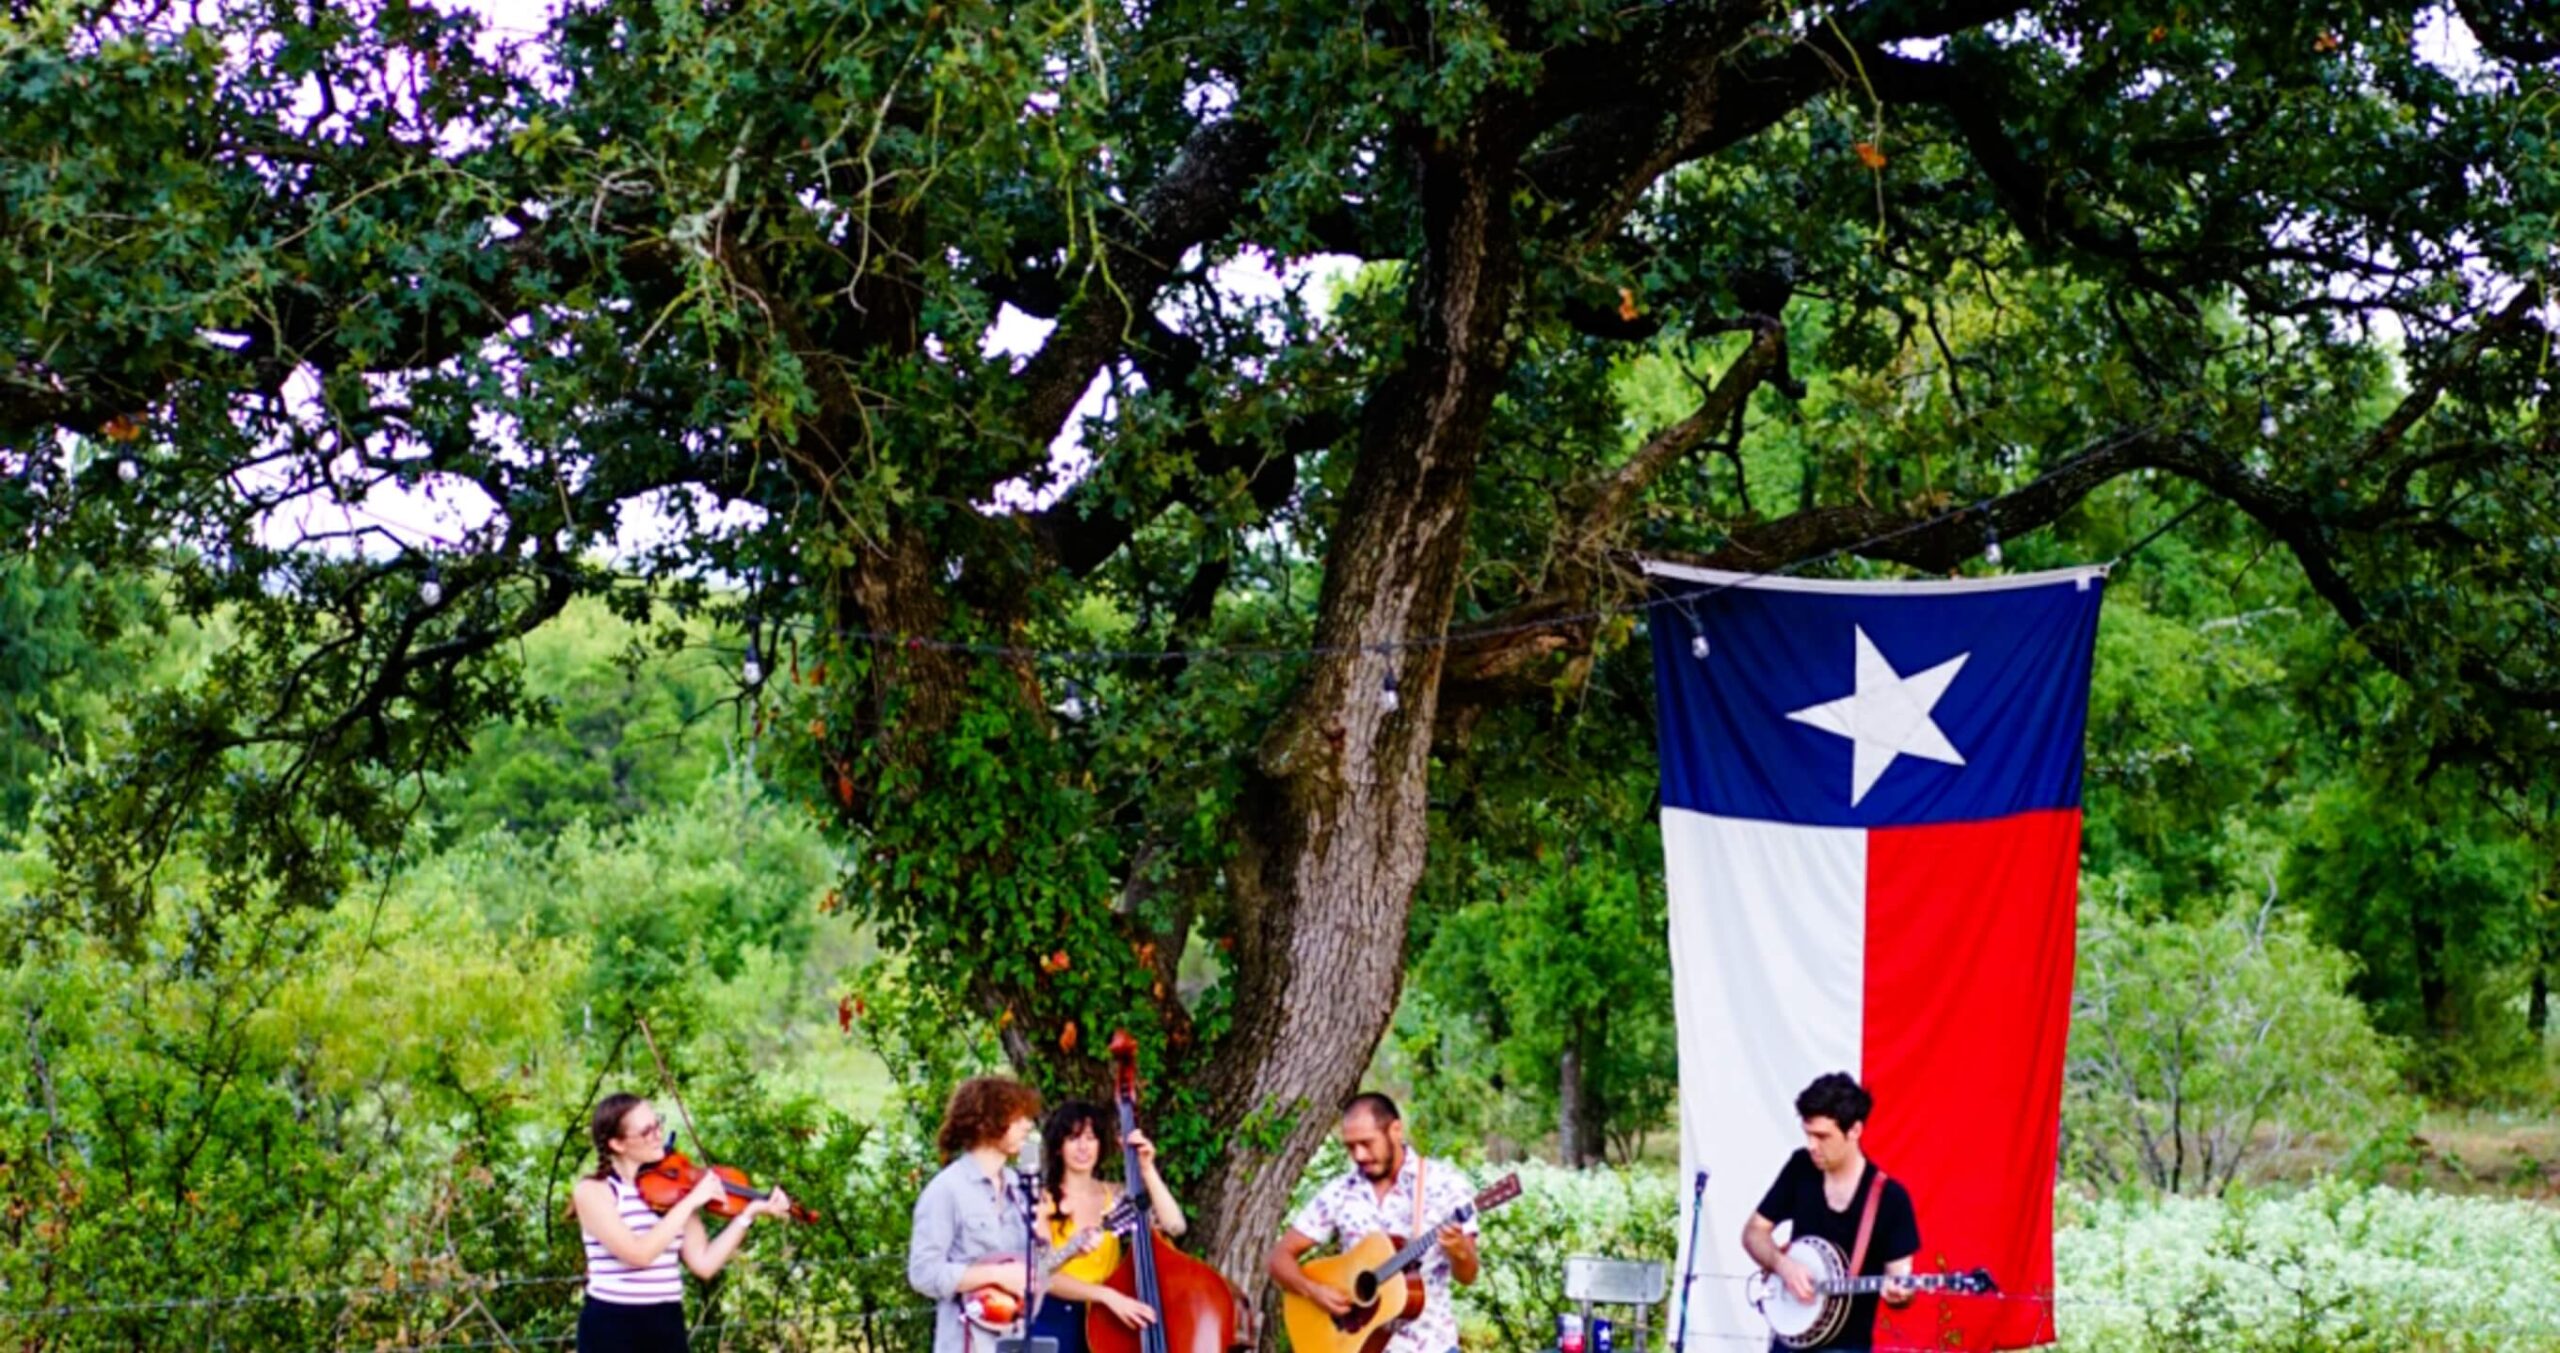 A group of people playing instruments under a flag in a family-friendly neighborhood.